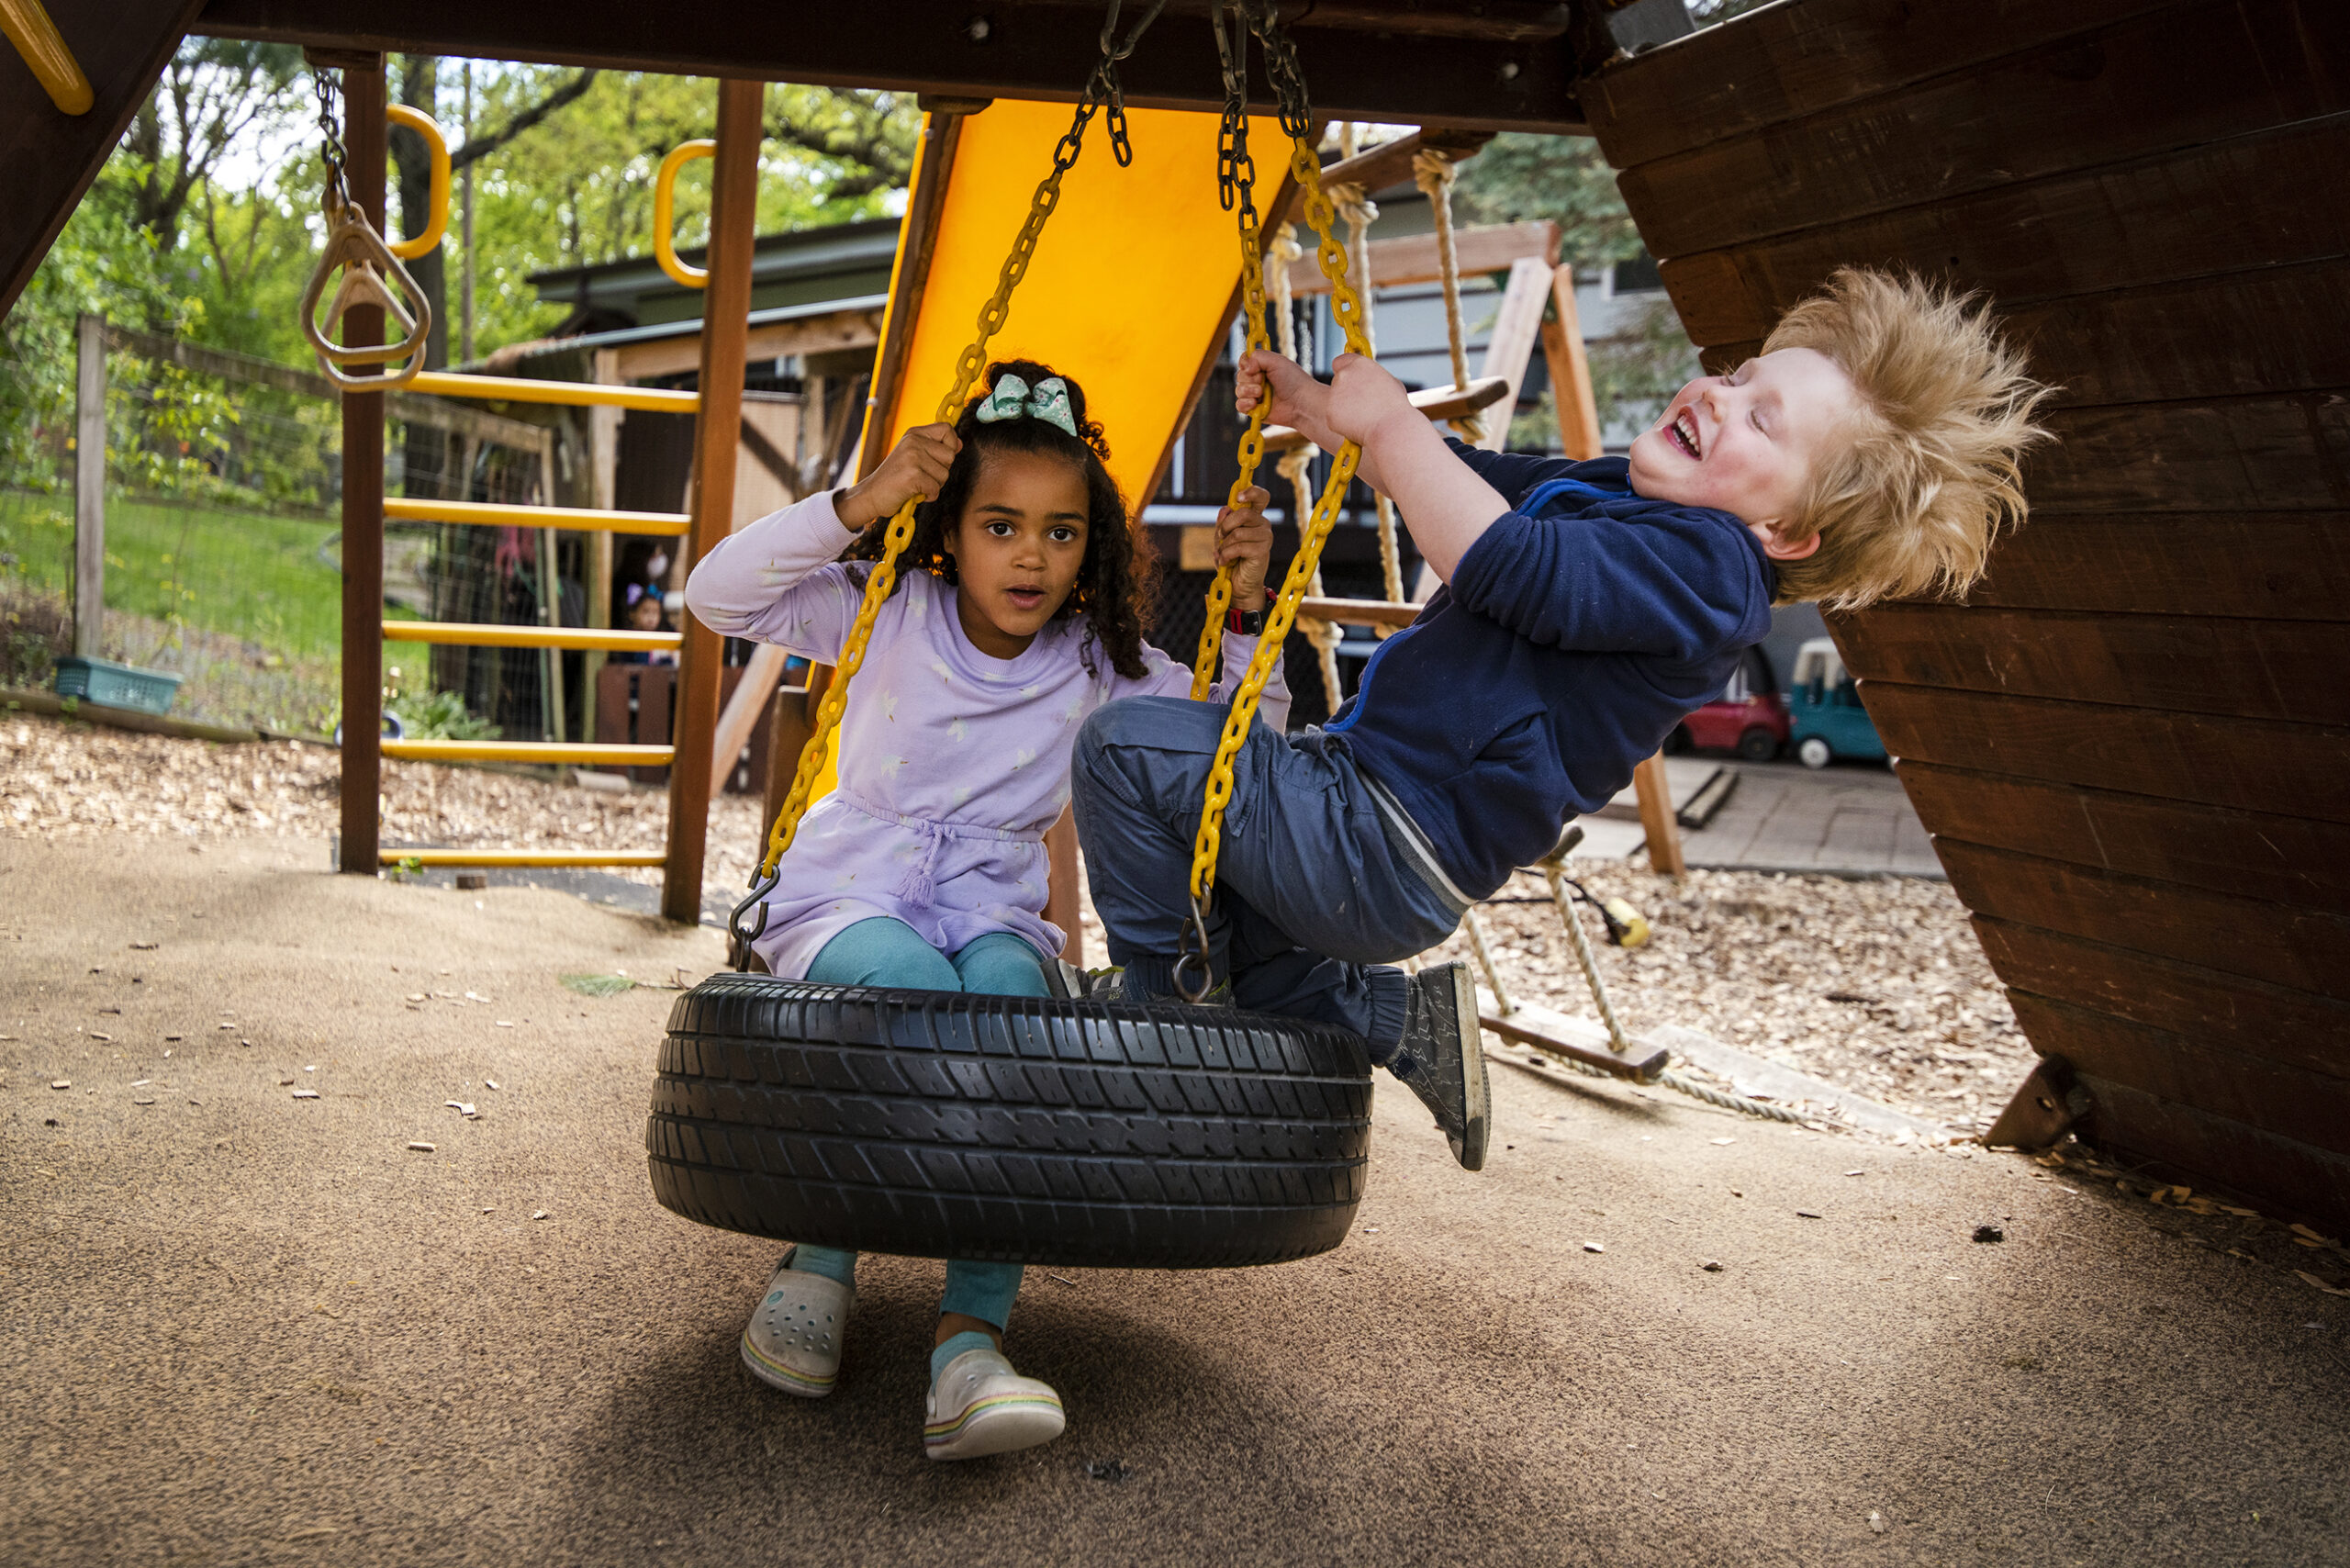 Two children swing on a tire swing. A child leans back as his blonde hair fans out behind him.